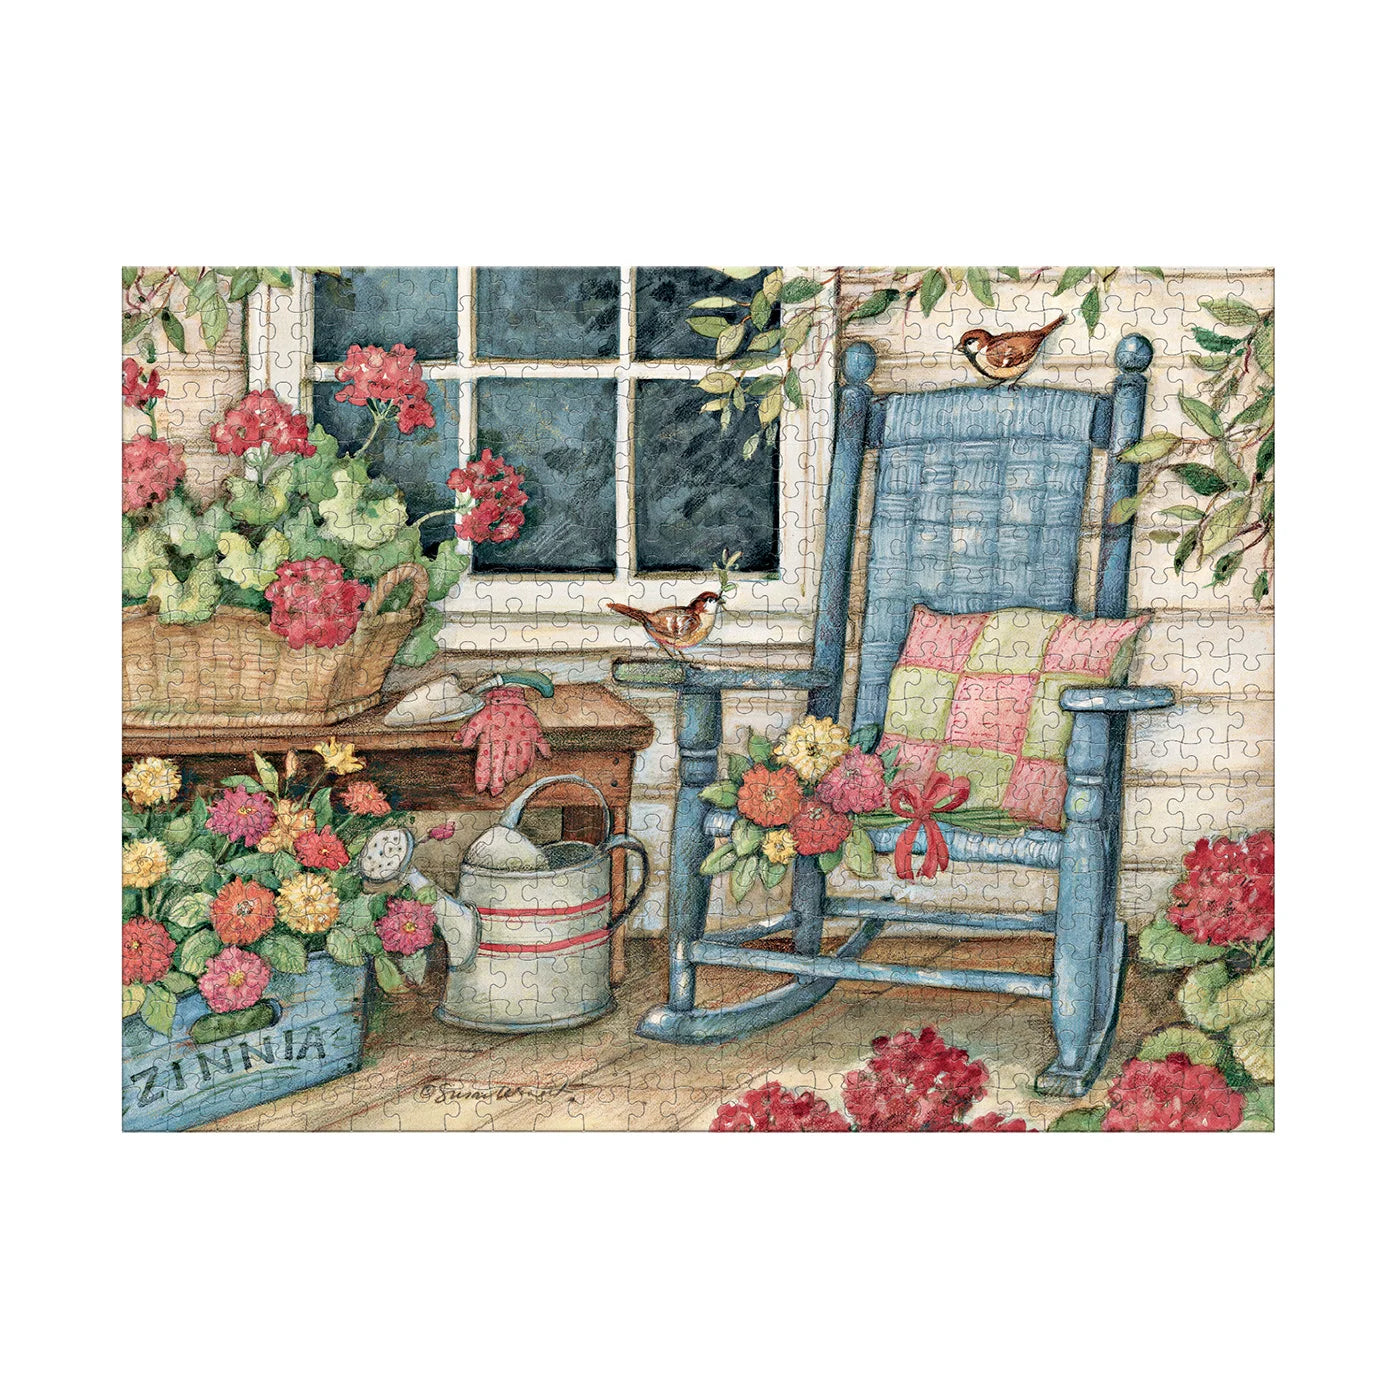 LANG Rocking Chair - 500pc Jigsaw Puzzle